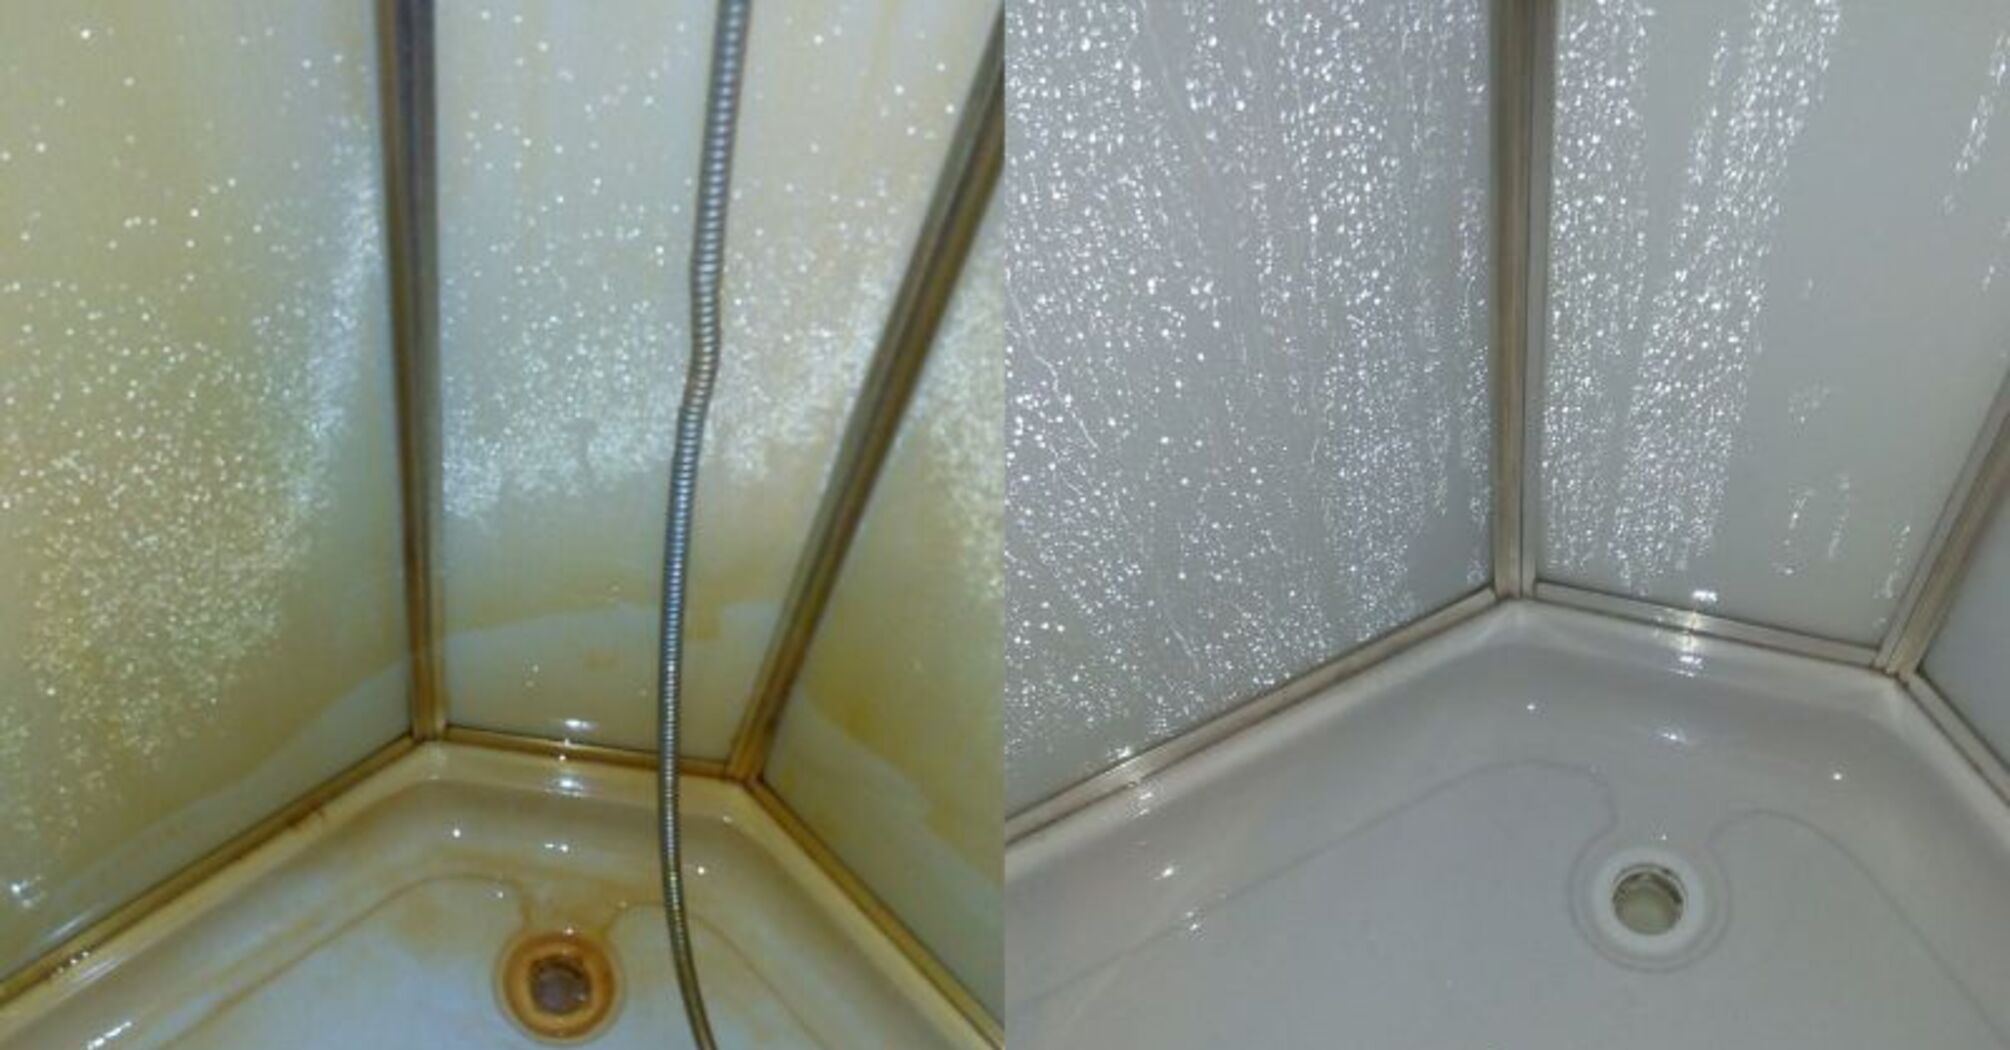 How to easily clean the shower enclosure from limescale and scale with a tea bag.